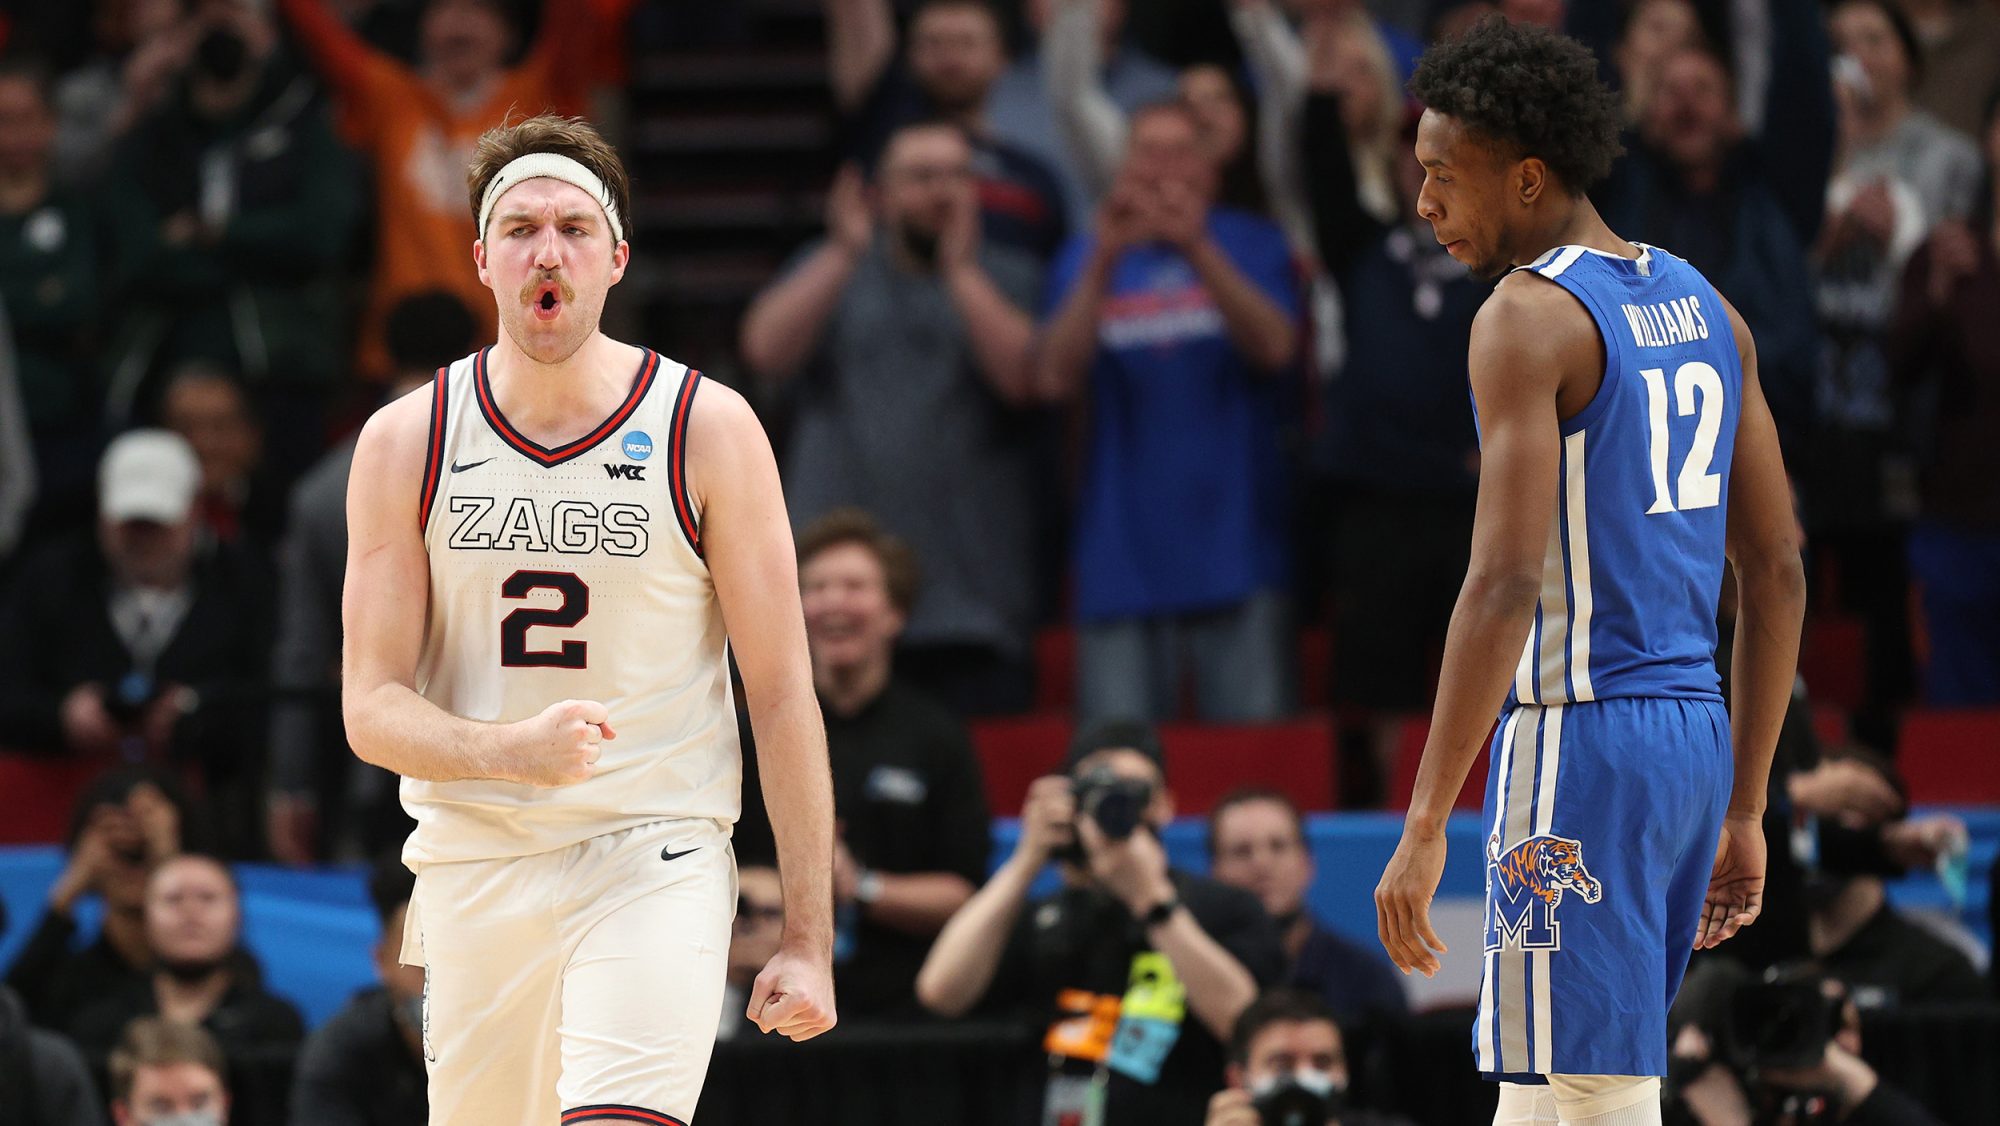 Drew Timme #2 of the Gonzaga Bulldogs reacts as DeAndre Williams #12 of the Memphis Tigers looks on after Gonzaga defeated Memphis 82-78 during the second half in the second round of the 2022 NCAA Men's Basketball Tournament at Moda Center on March 19, 2022 in Portland, Oregon.